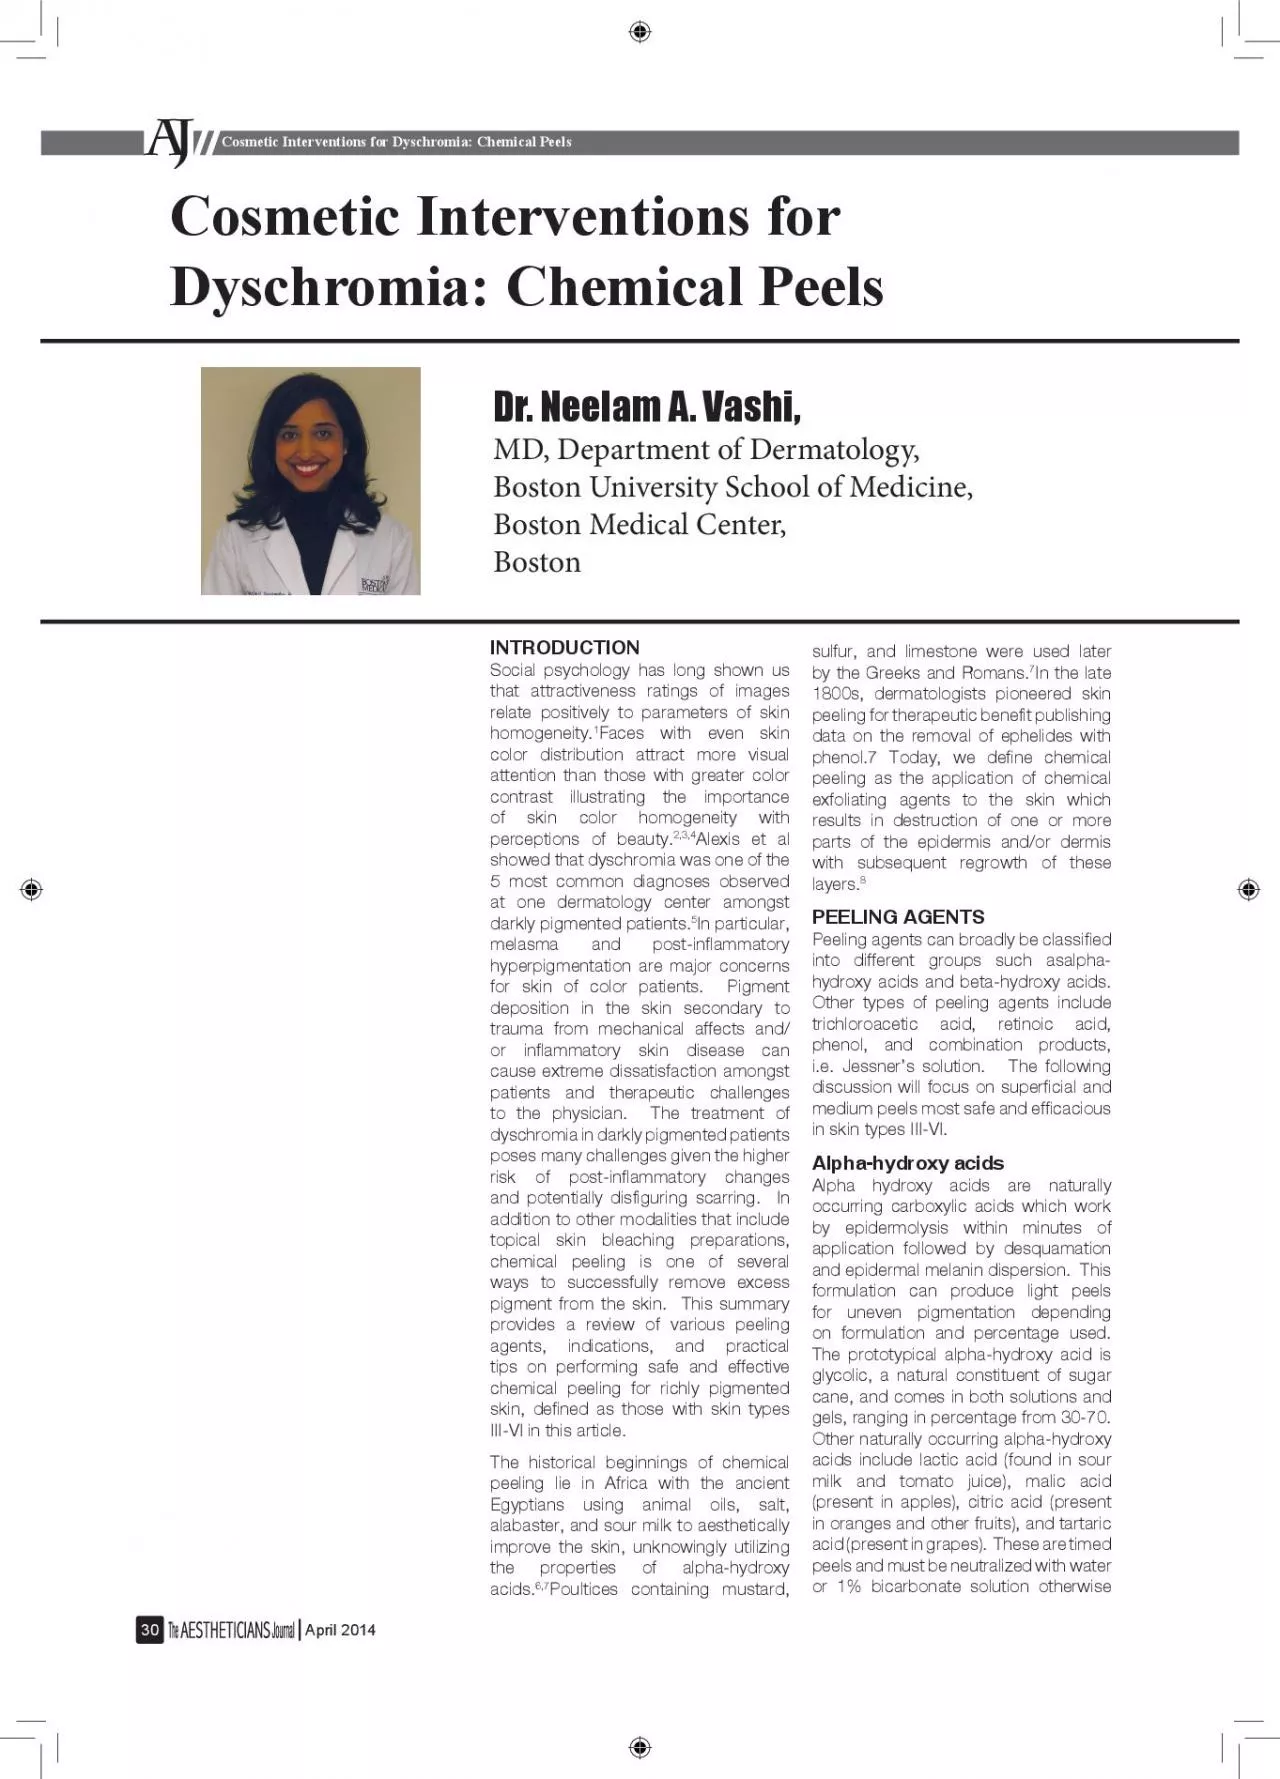 Cosmetic Interventions for Dyschromia Chemical Peels